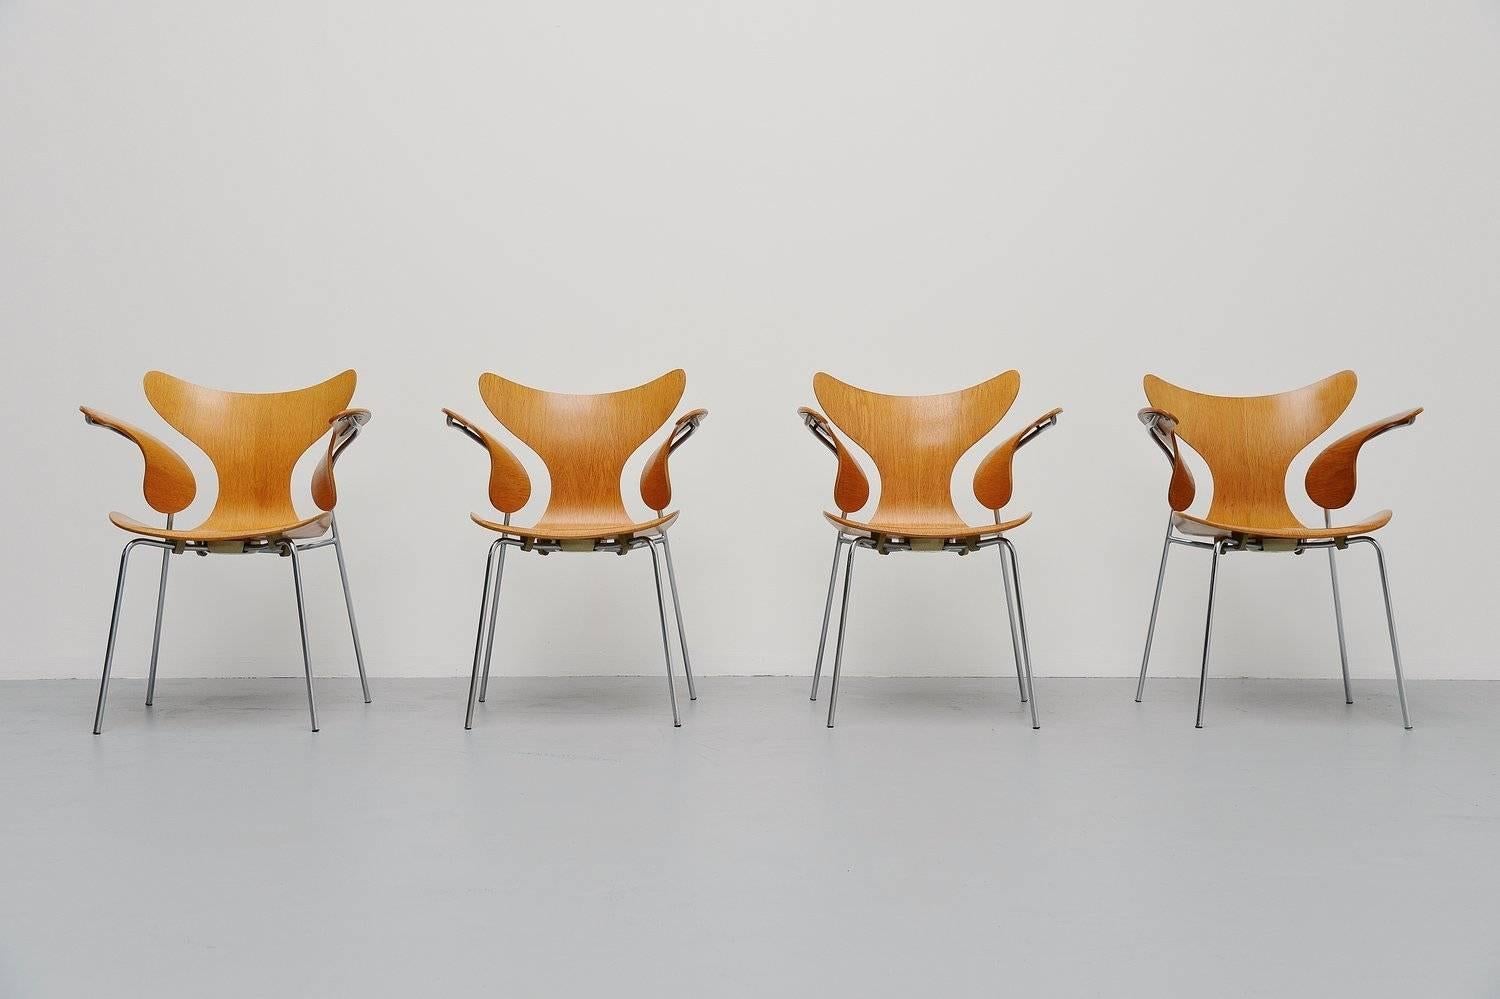 Fantastic sculptural set of dining chairs model 3208 designed by Arne Jacobsen for Fritz Hansen, Denmark, 1972. This early set is a production from 1972 (stamped on the bottom of the plastic cap below the seat) when the design was from 1970 so its